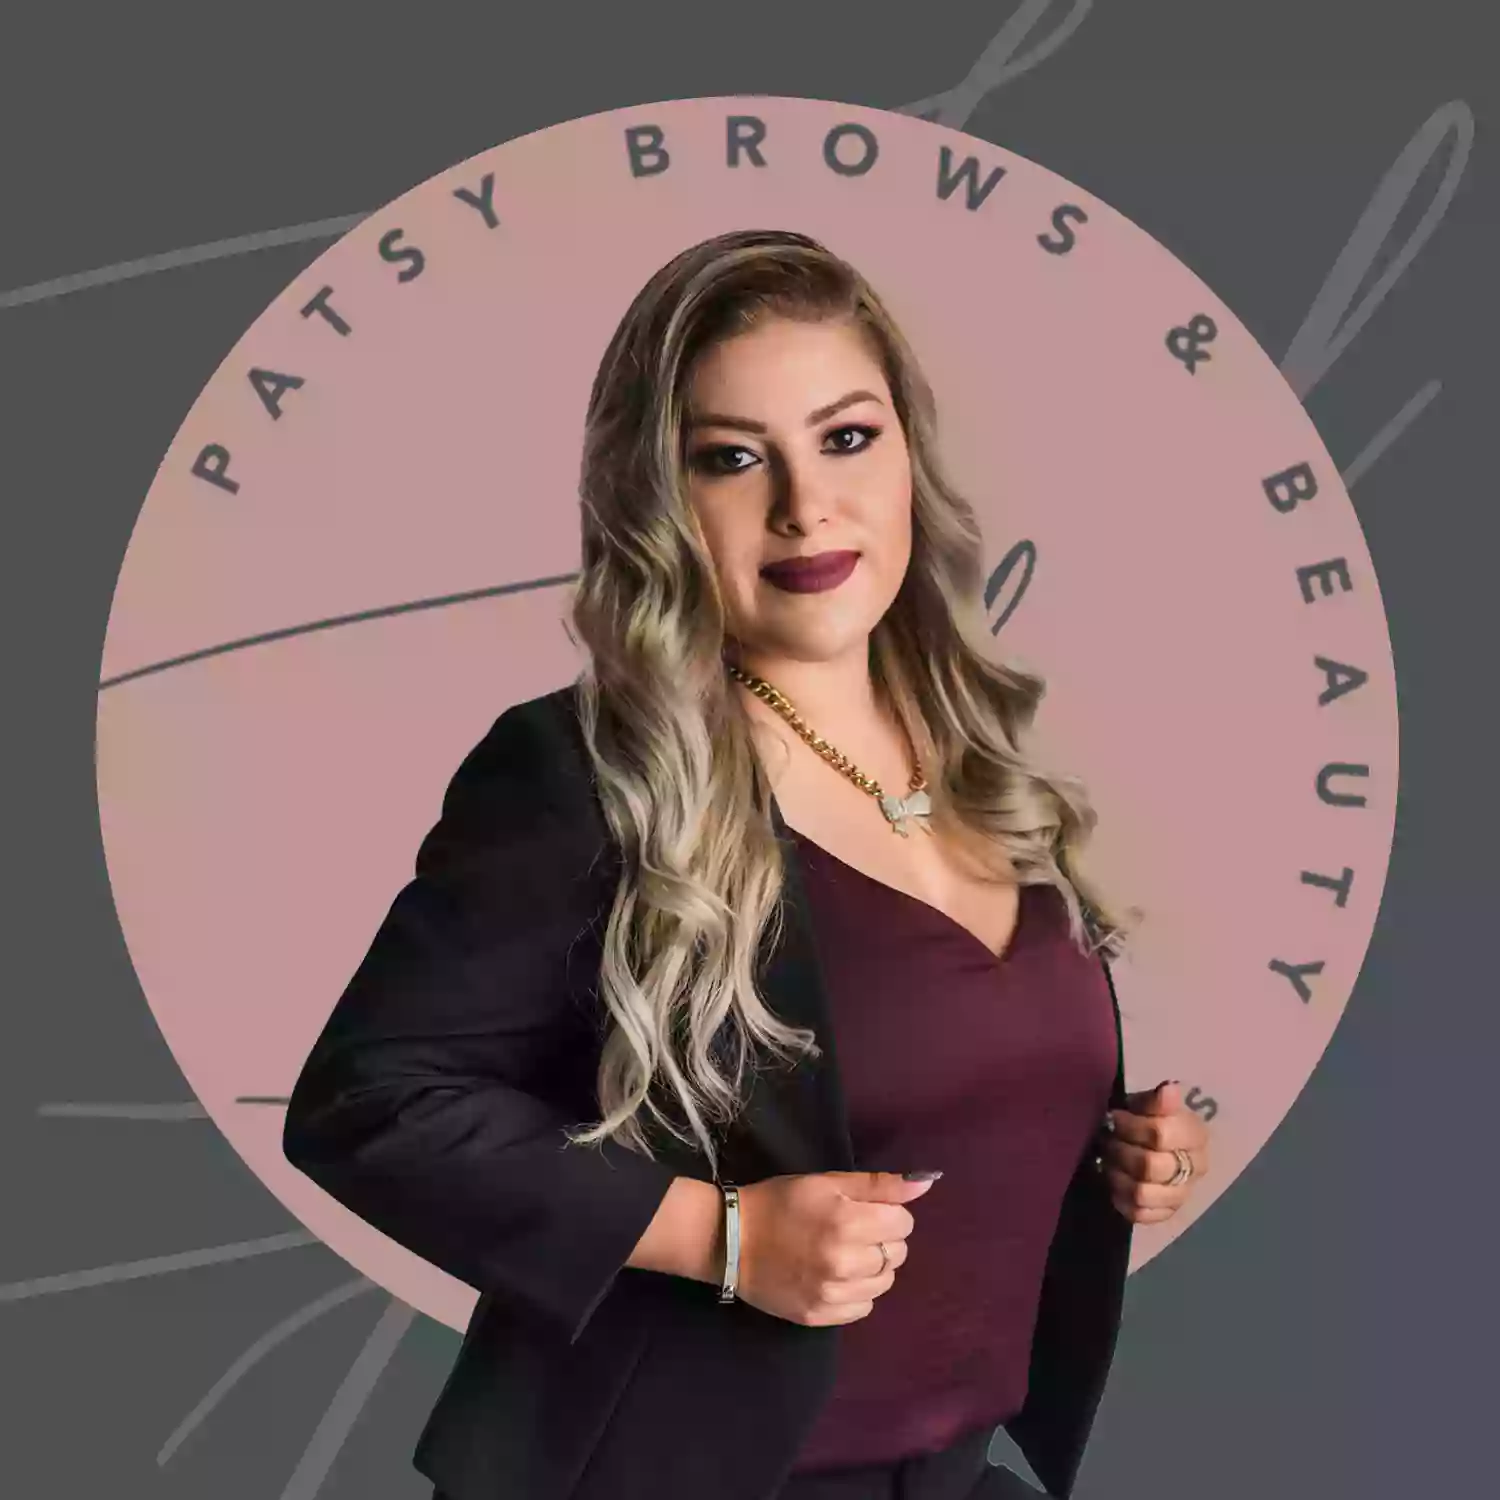 Patsy Brows Beauty Academy